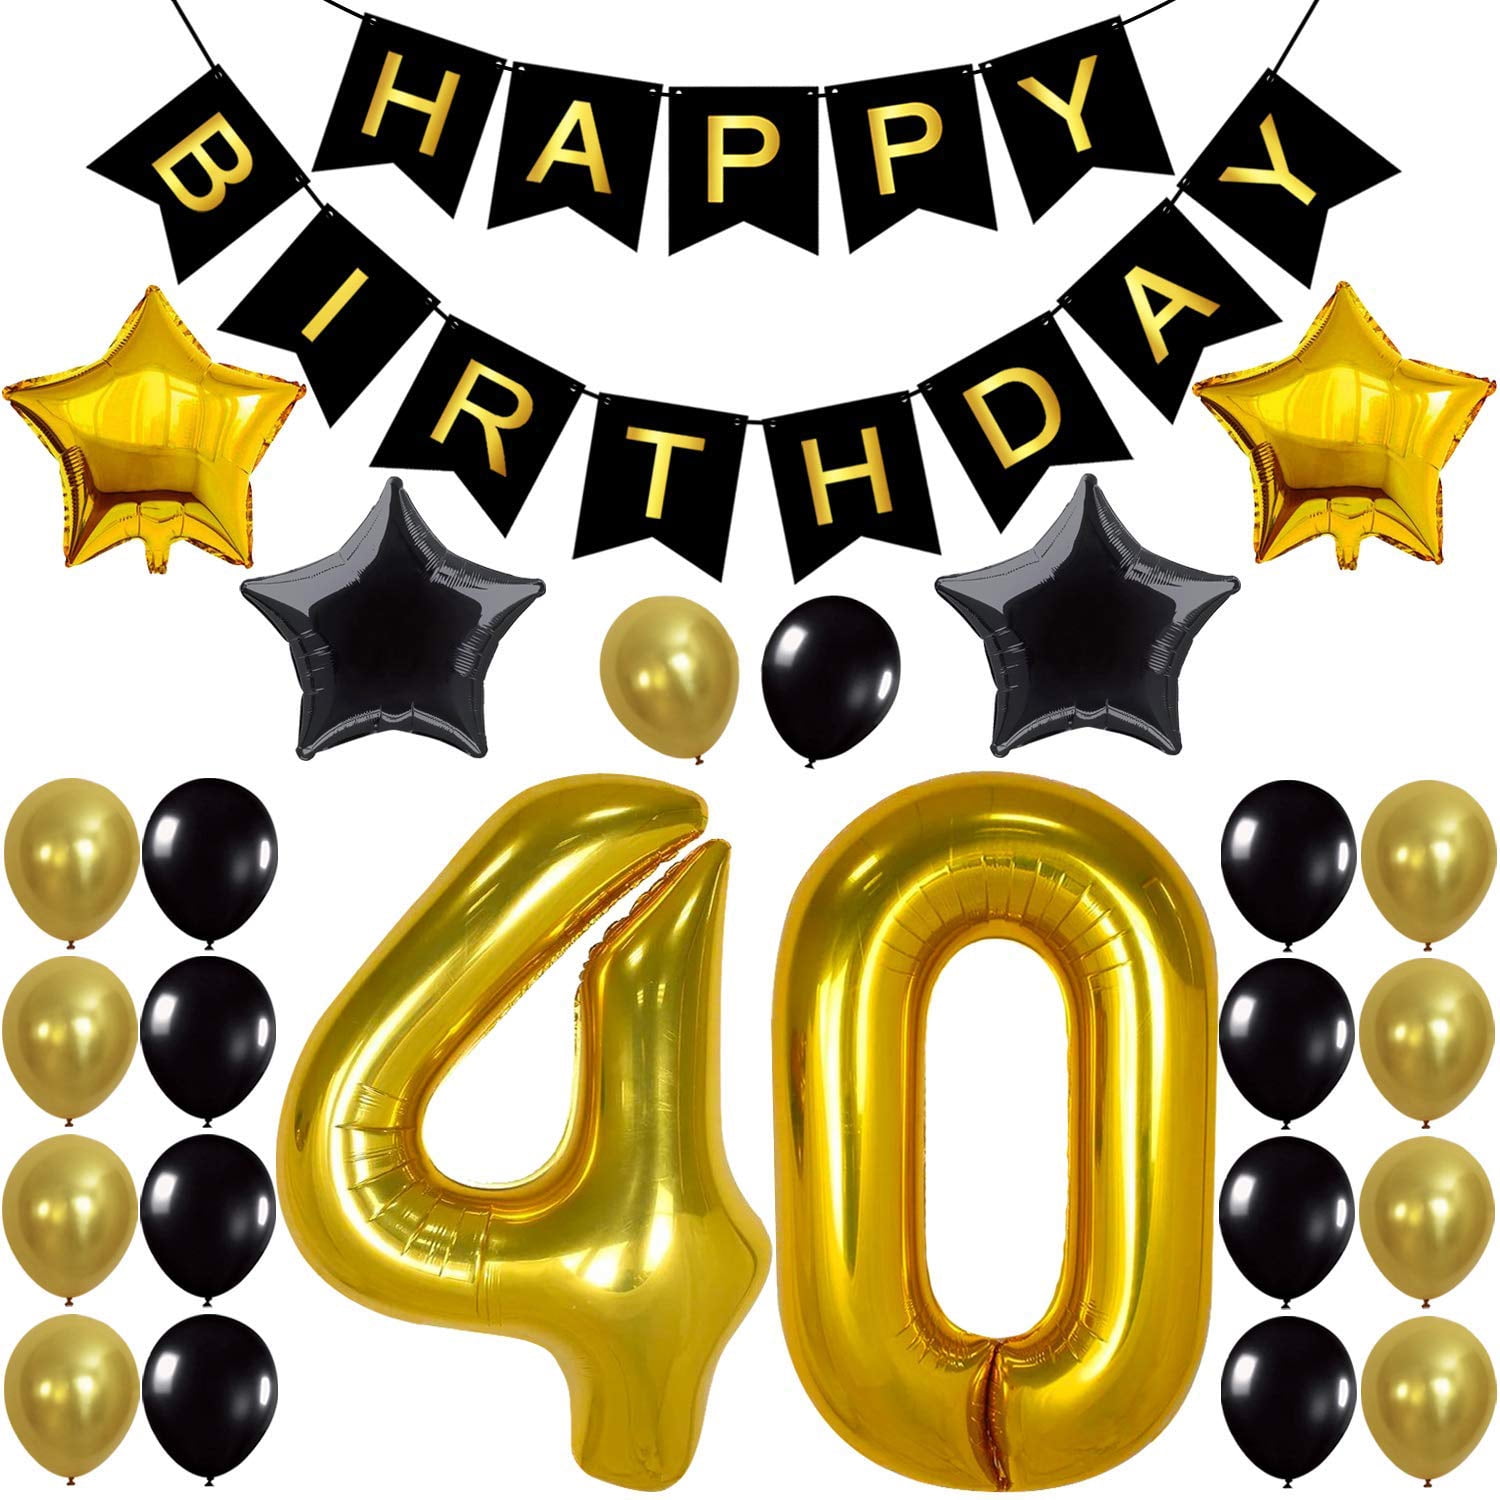 30th Birthday/Anniversary Banner Gold and Red Thirty & Fabulous Banner 30th Birthday/Anniversary Party Decoratons 